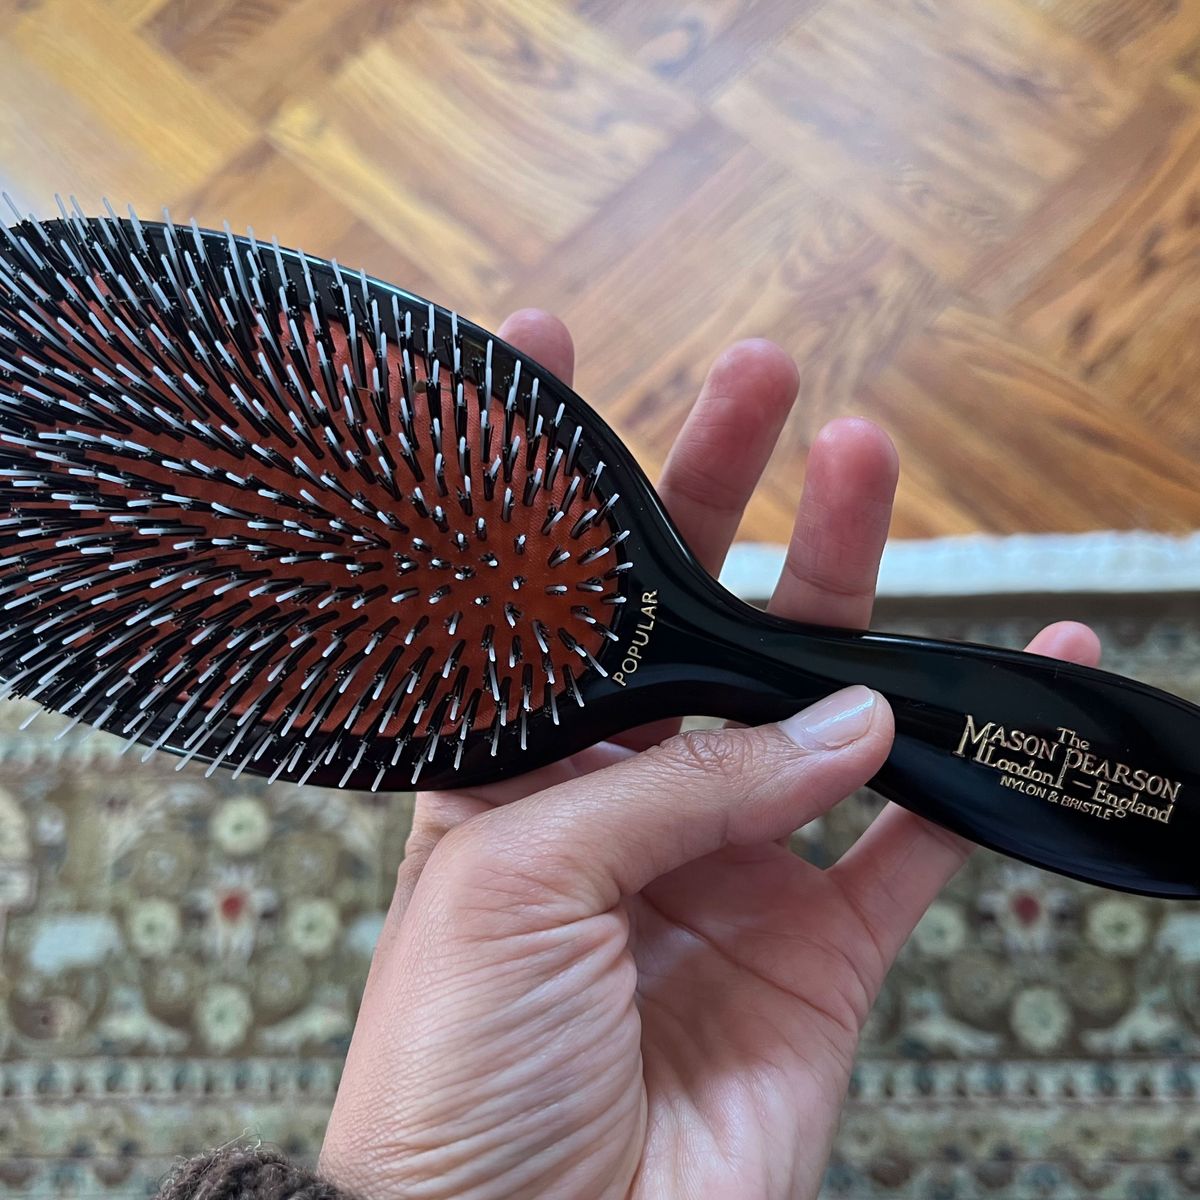 Mason Pearson Hairbrushes on Sale at Costco | The Strategist